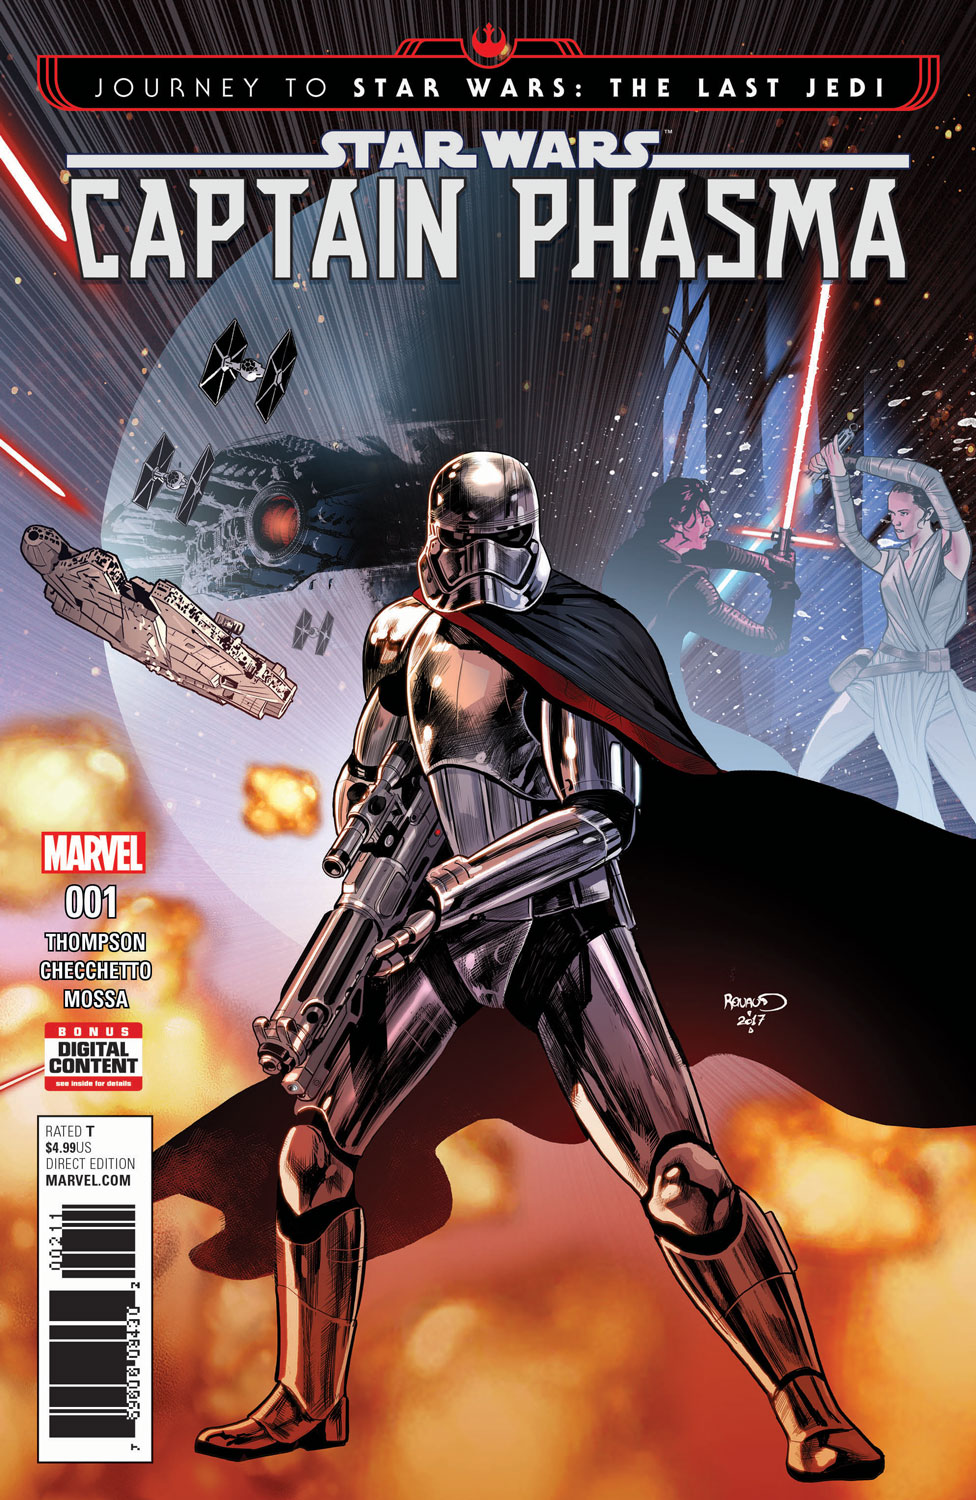 Marvel Preview: Journey to Star Wars: The Last Jedi - Captain Phasma #1